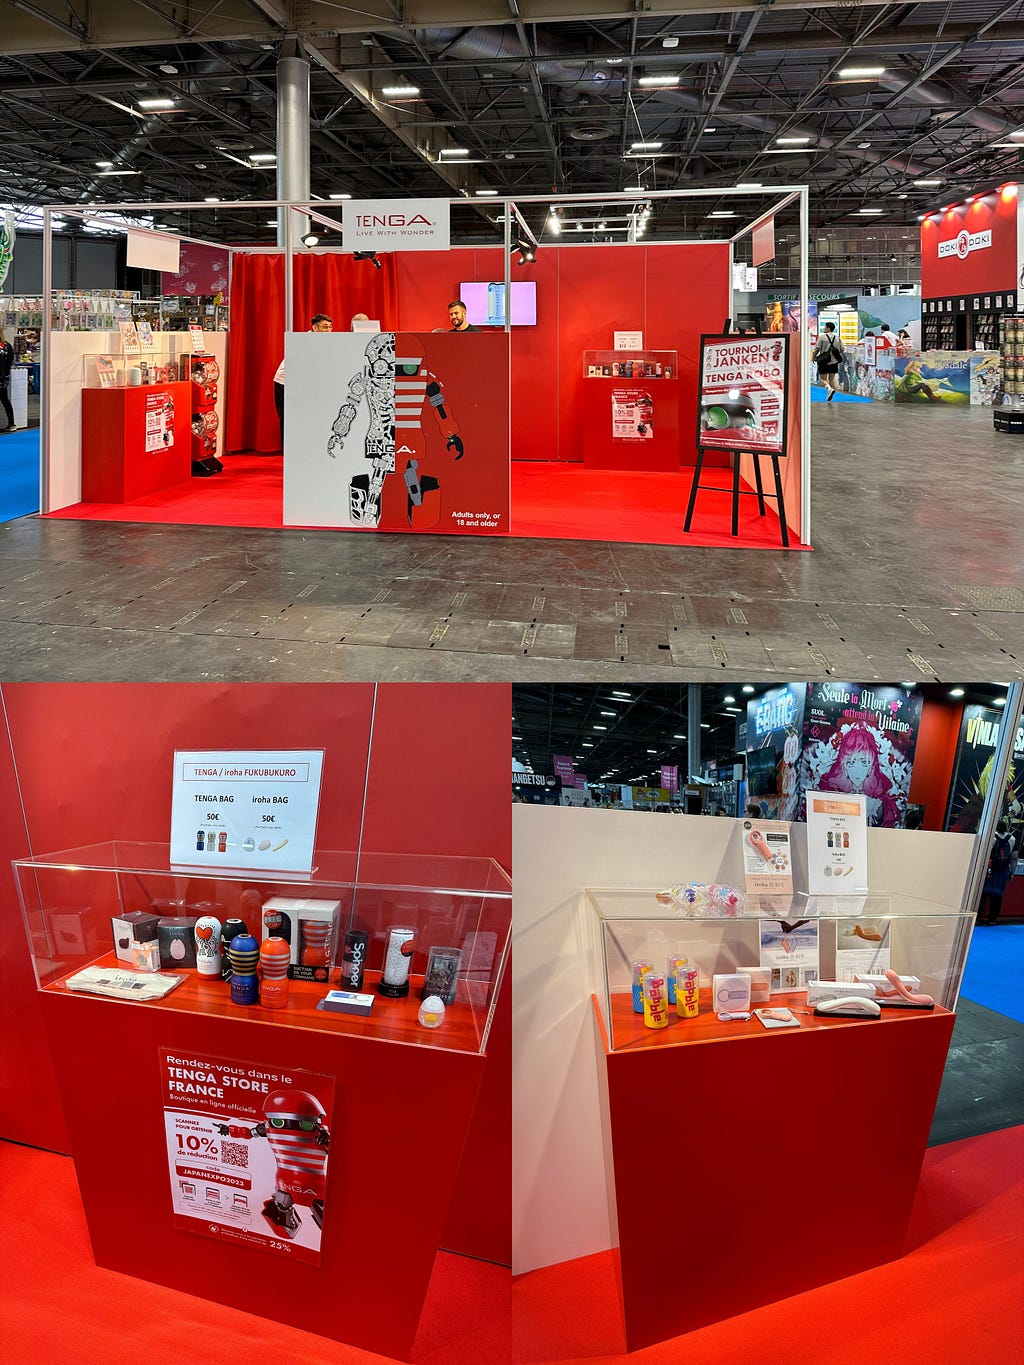 Top: photo of the TENGA booth set up, with display cases and posters. Bottom left: Display case of popular TENGA and iroha products. Bottom right: display case of TENGA Bobble, iroha mai and iroha SVR